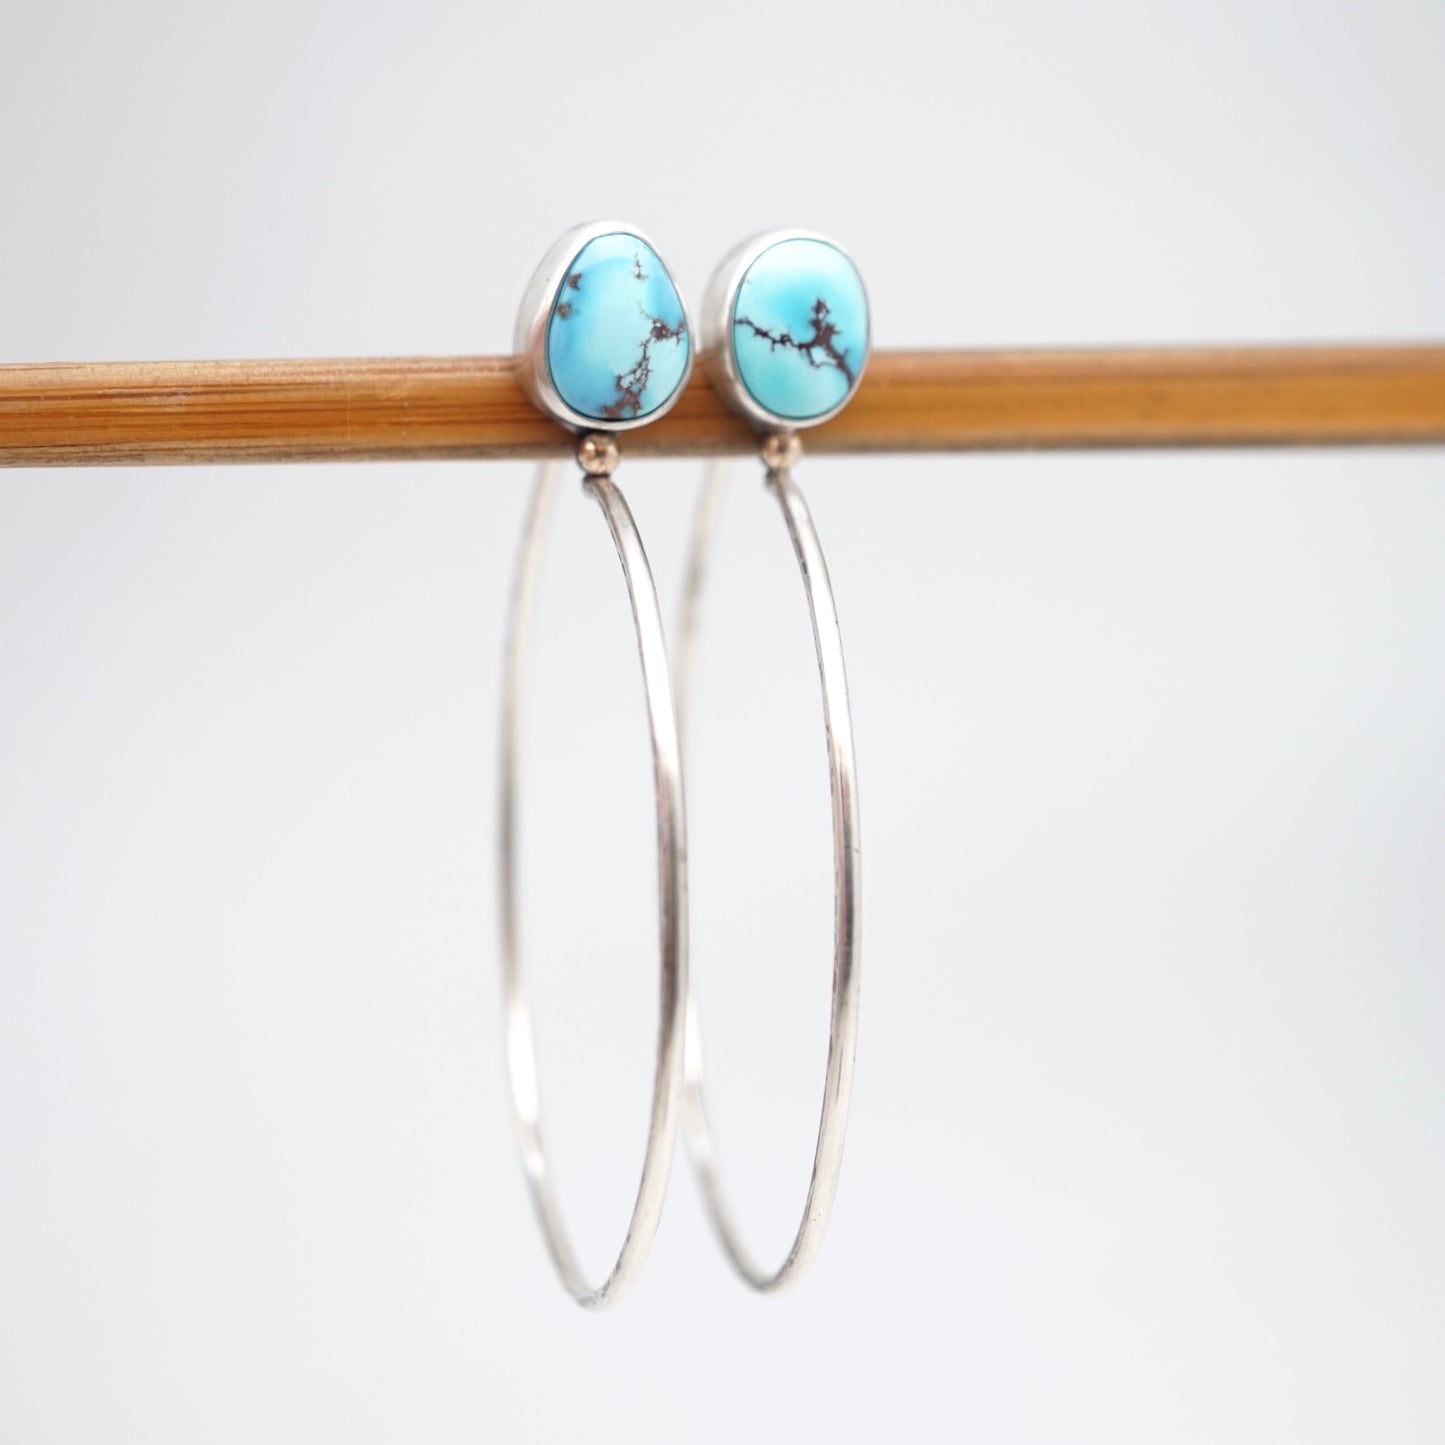 high grade lavender turquoise hoops w/ 14k accent- SMALL SIZE - Lumenrose